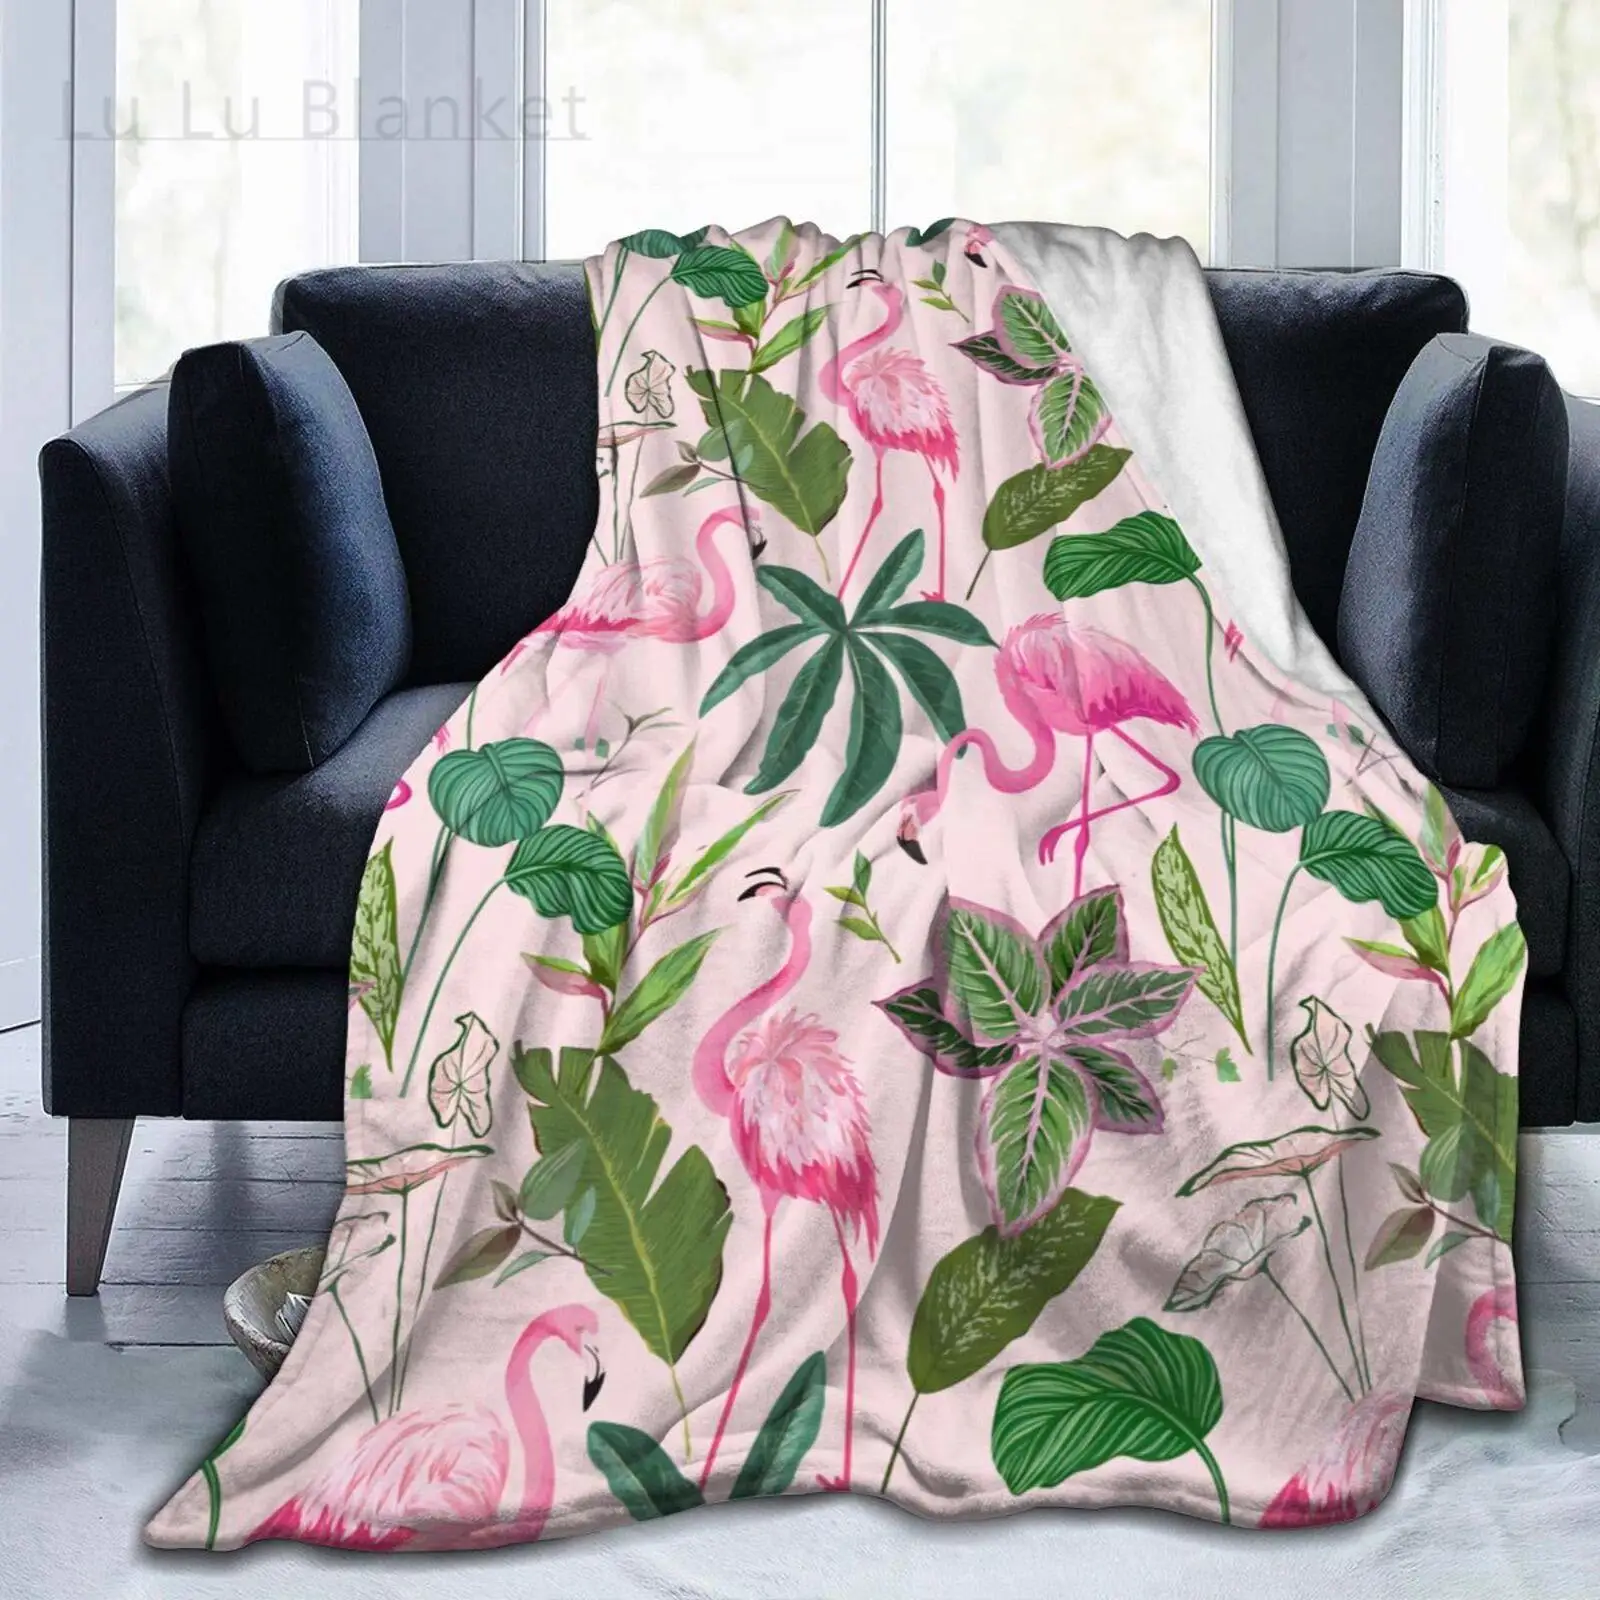 

Pink Flamingo Blanket Flannel Throw Blanket Ultra Soft Micro Fleece Blanket Bed Couch Living Room 150x220cm for Adults